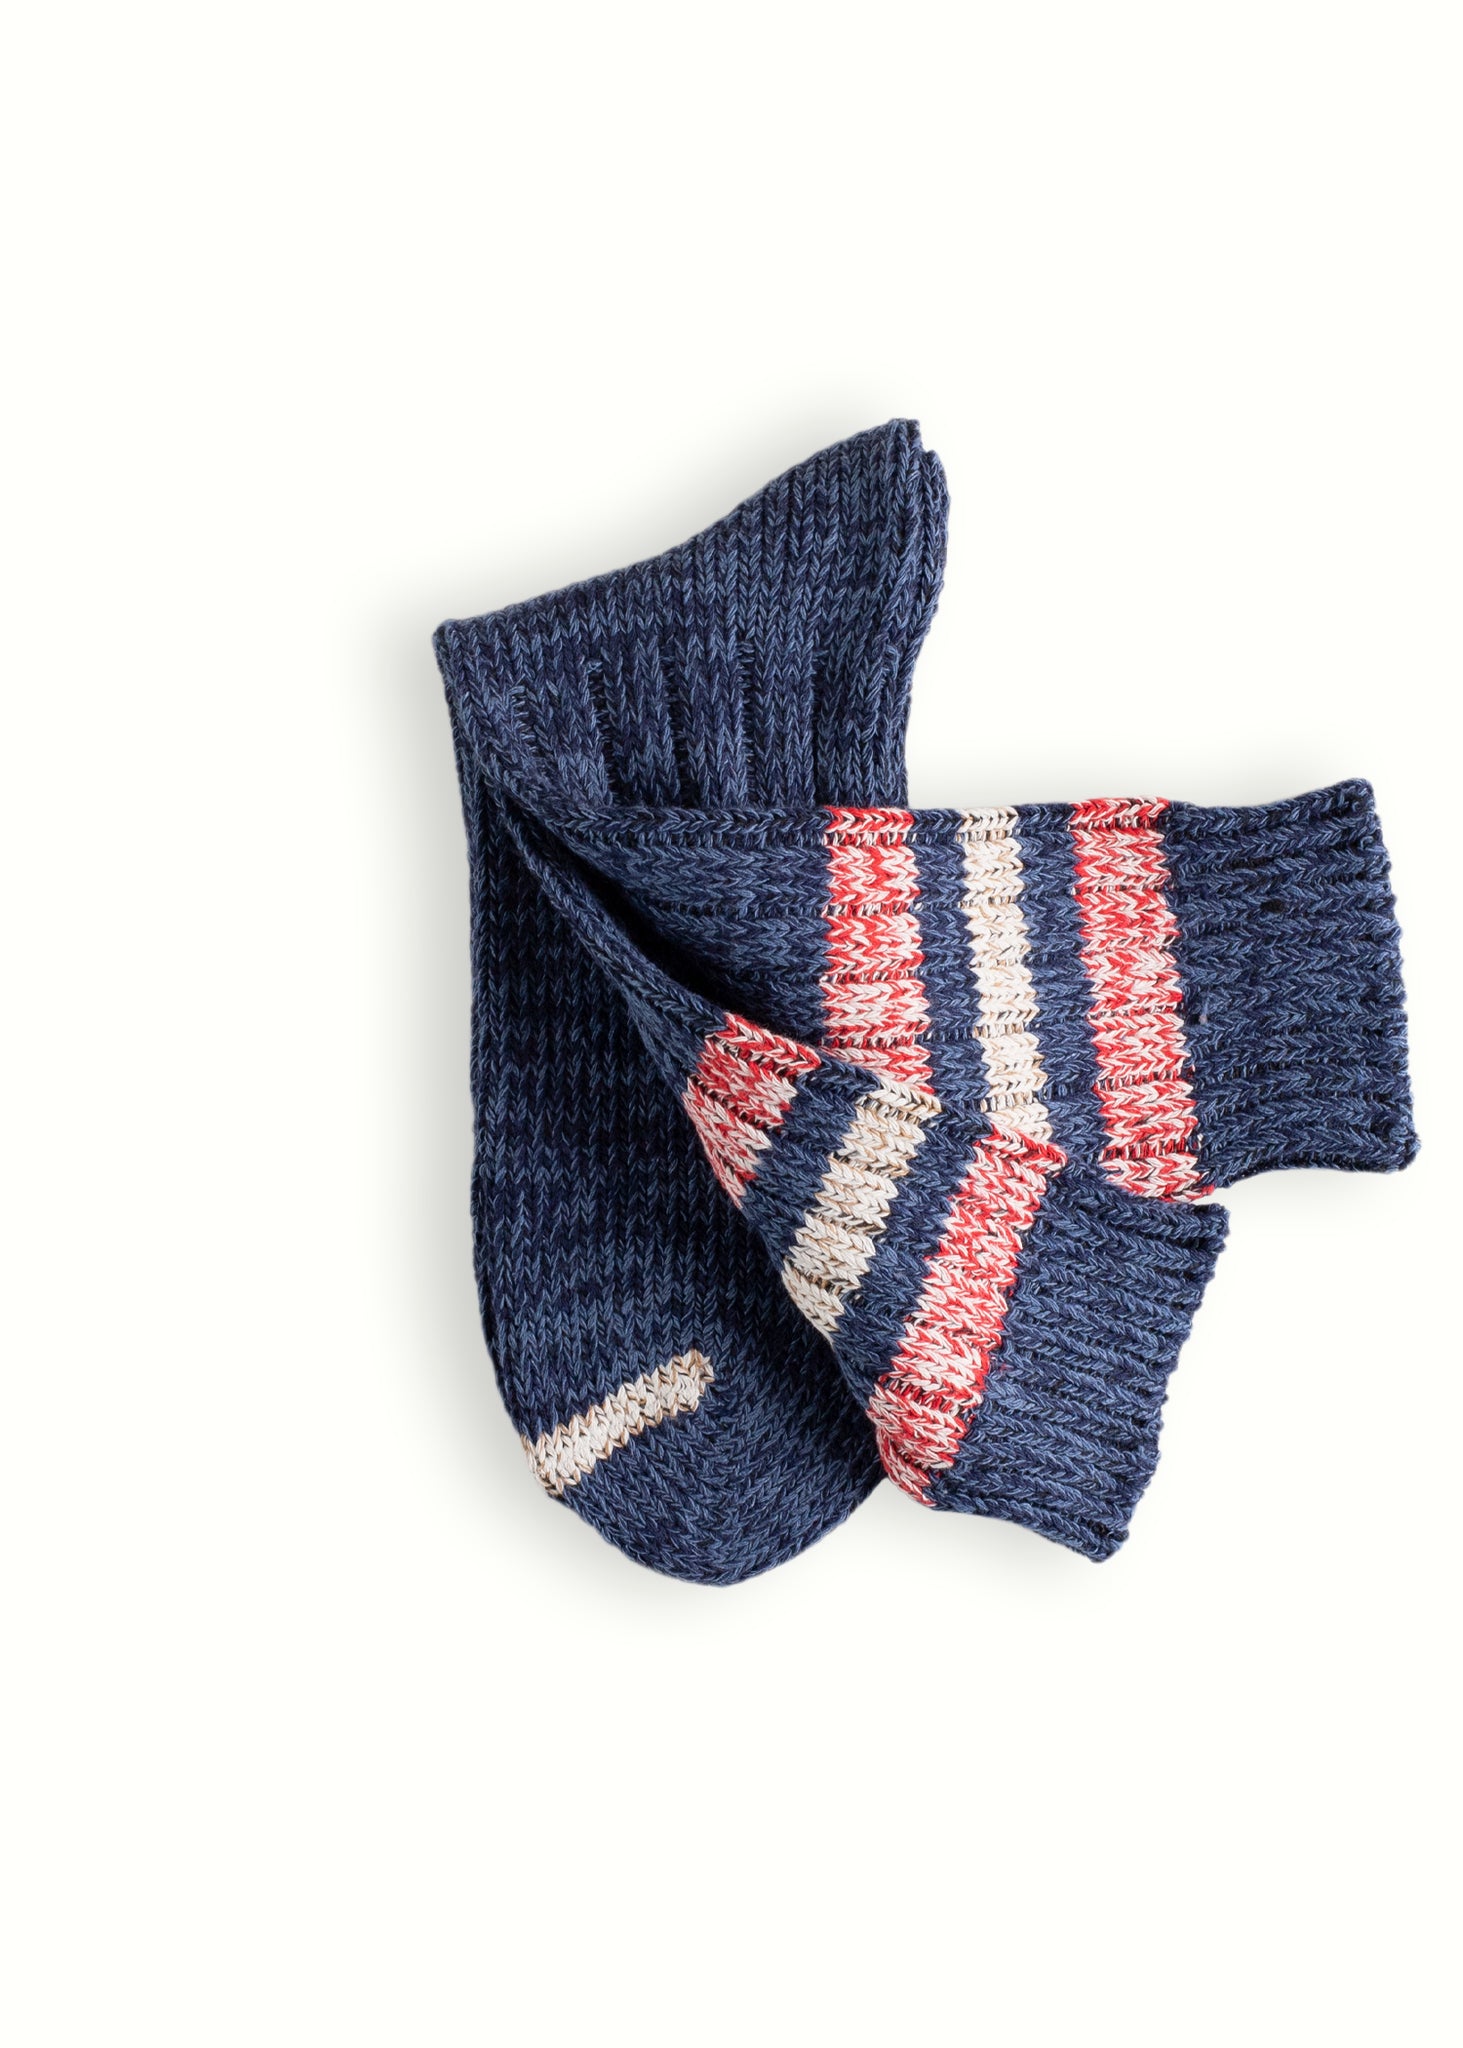 OUTSIDERS COLLECTION Navy Socks